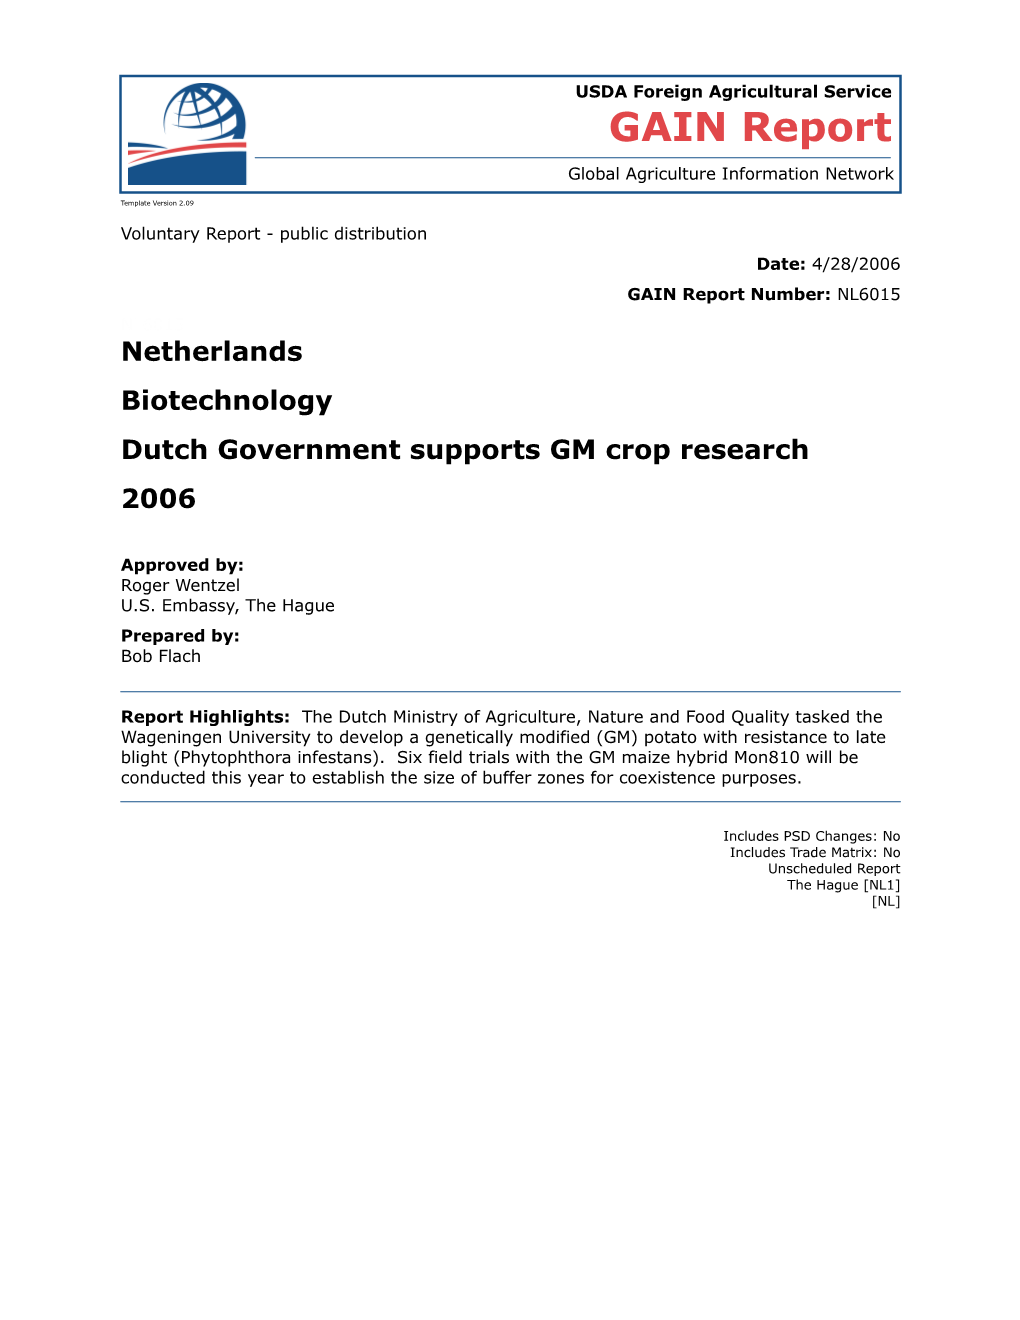 Dutch Government Supports GM Crop Research